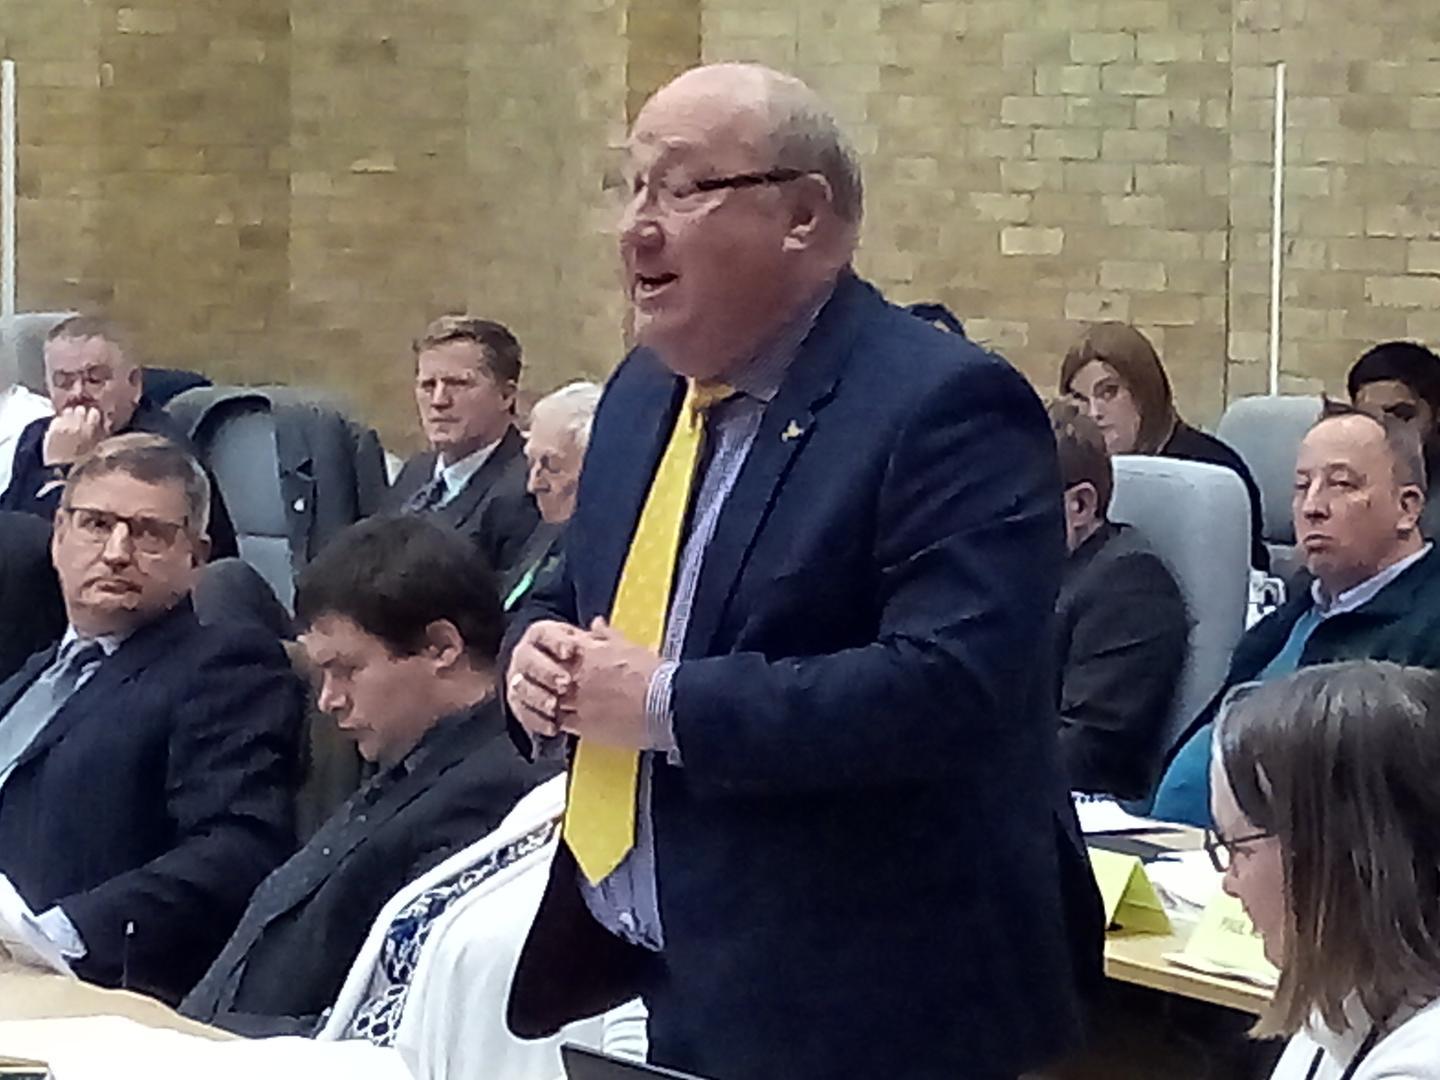 Lib Dem leader Douglas McCall (Newport Pagnell South) - pictured to the left in this picture - proposed amendments to Labours budget to include a wide range of community projects. They were all accepted by Cllr Marland.
Pictured standing is Lib Dem budget guru Cllr Robin Bradburn (Bradwell ward).